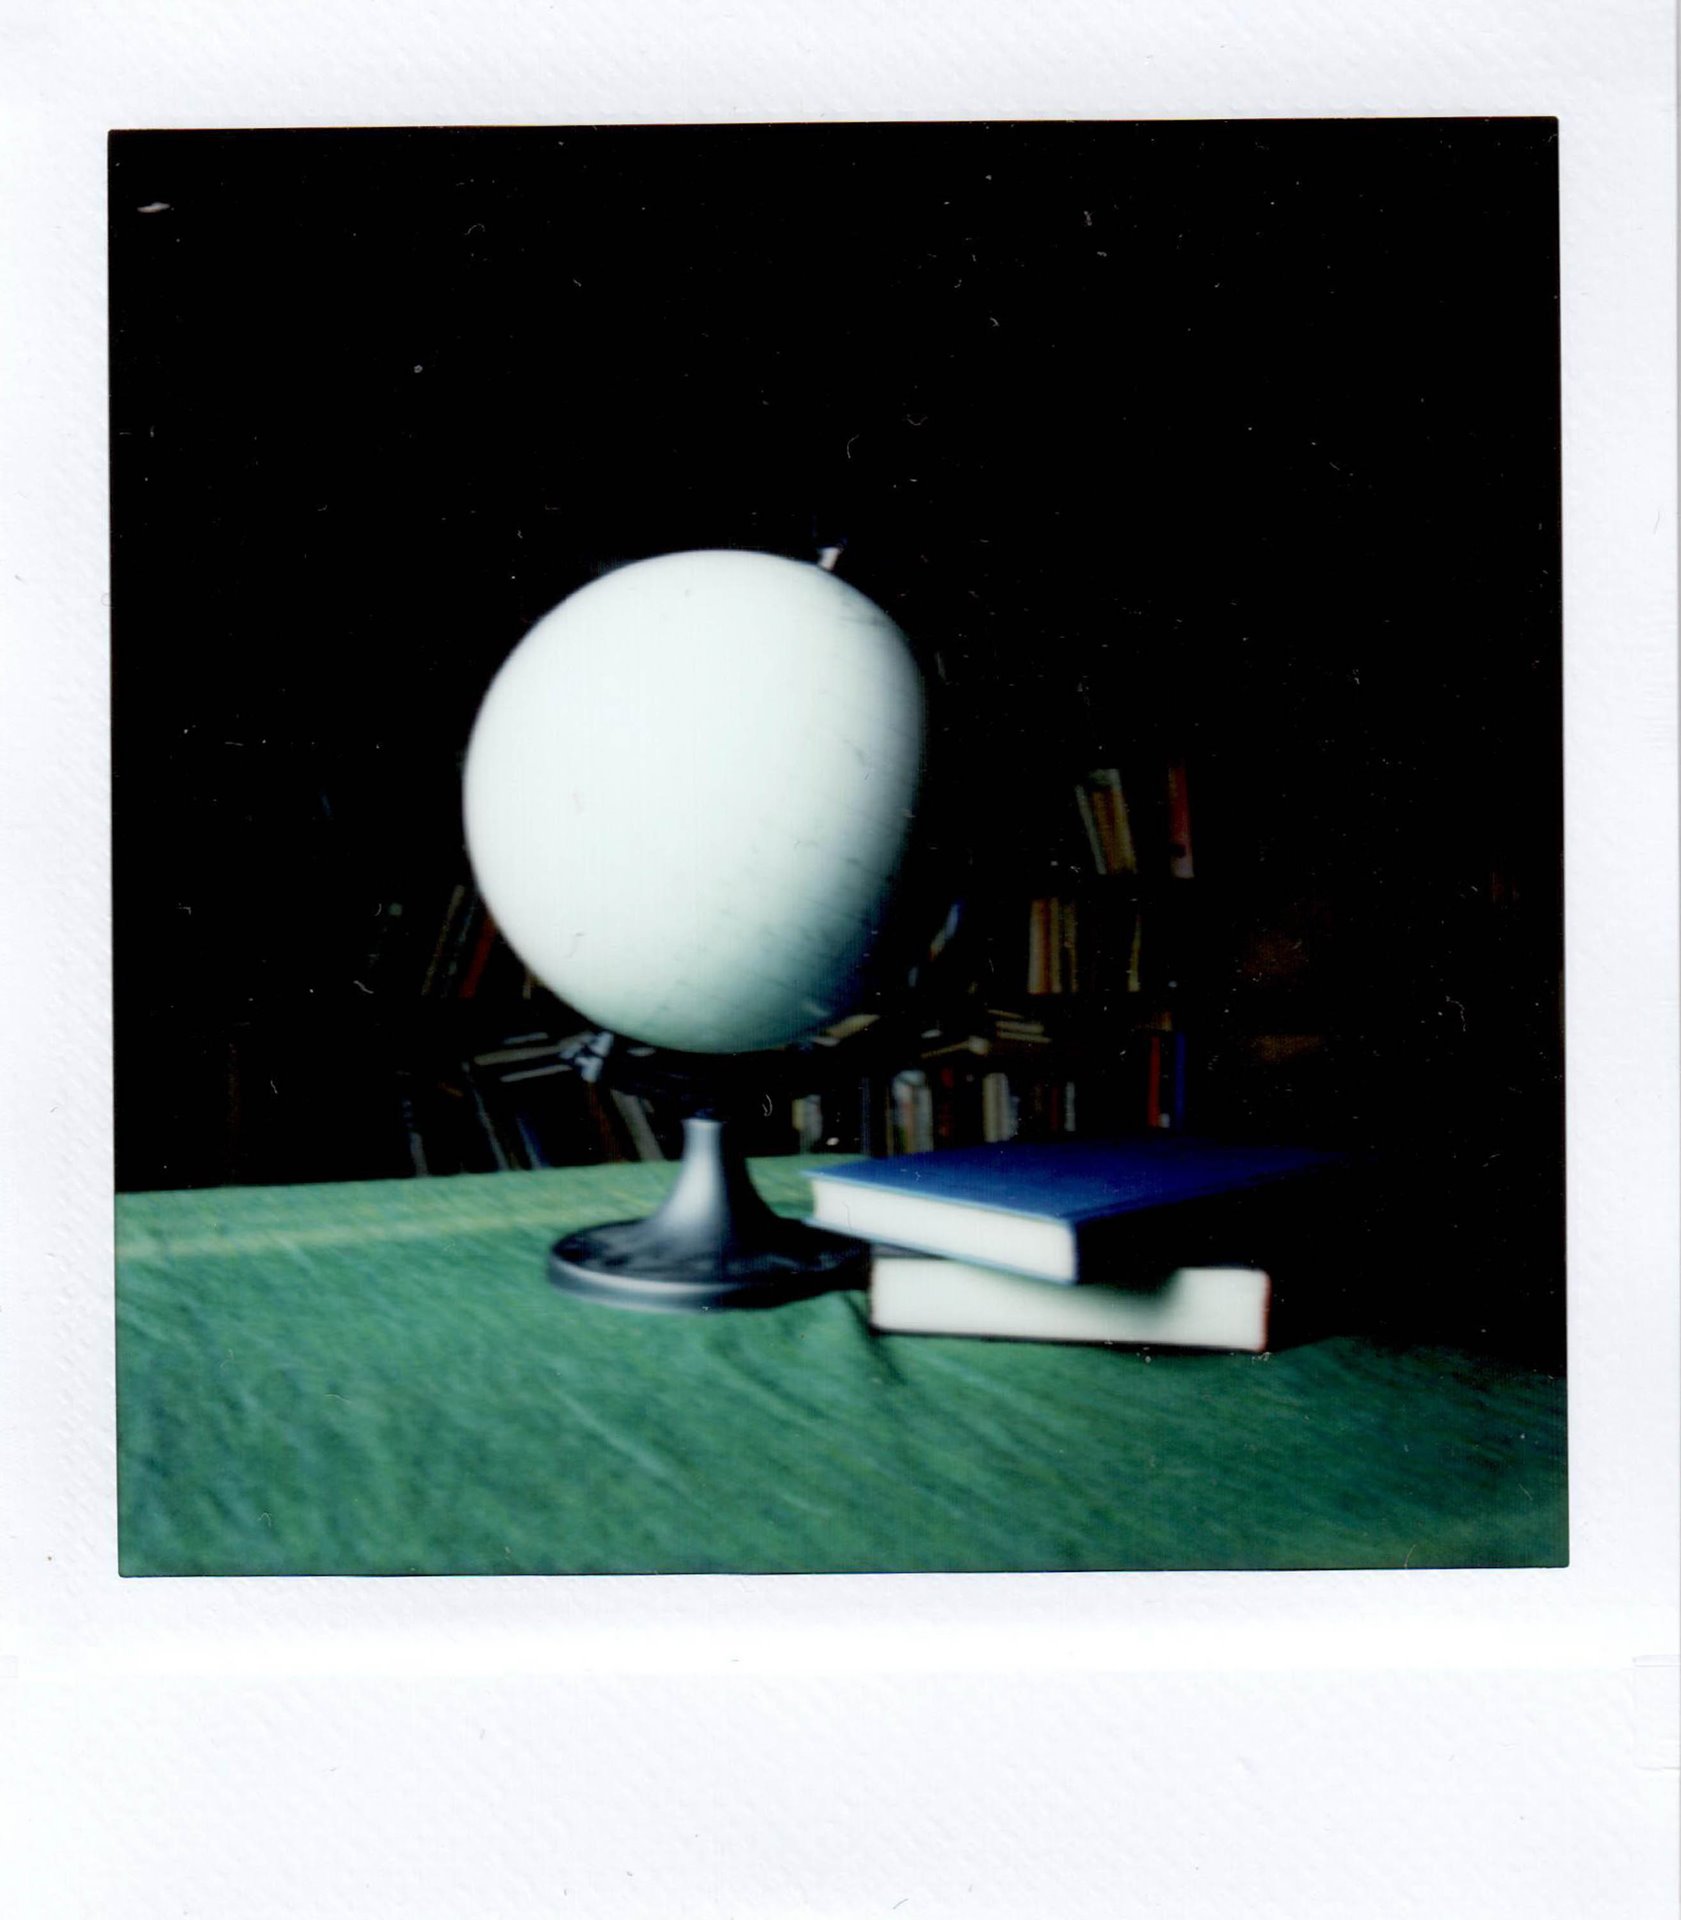 A globe in the Svetlana village library, in a photograph taken by Tatyana.